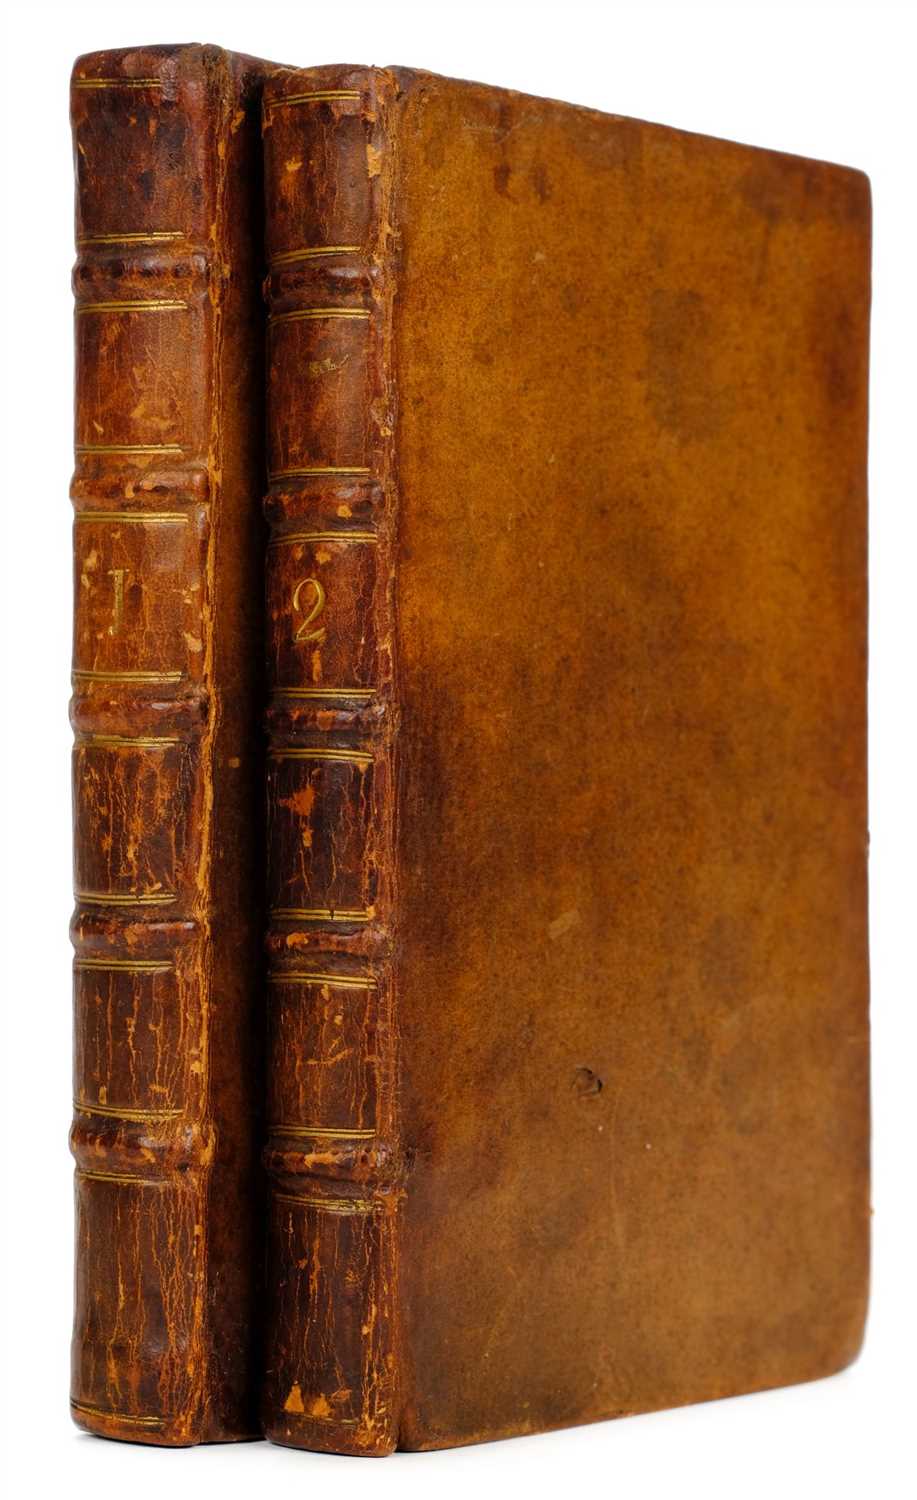 Lot 228 - Novel. The Virtuous Criminal; or, the History of Lord Stanley, 1st edition, 1759